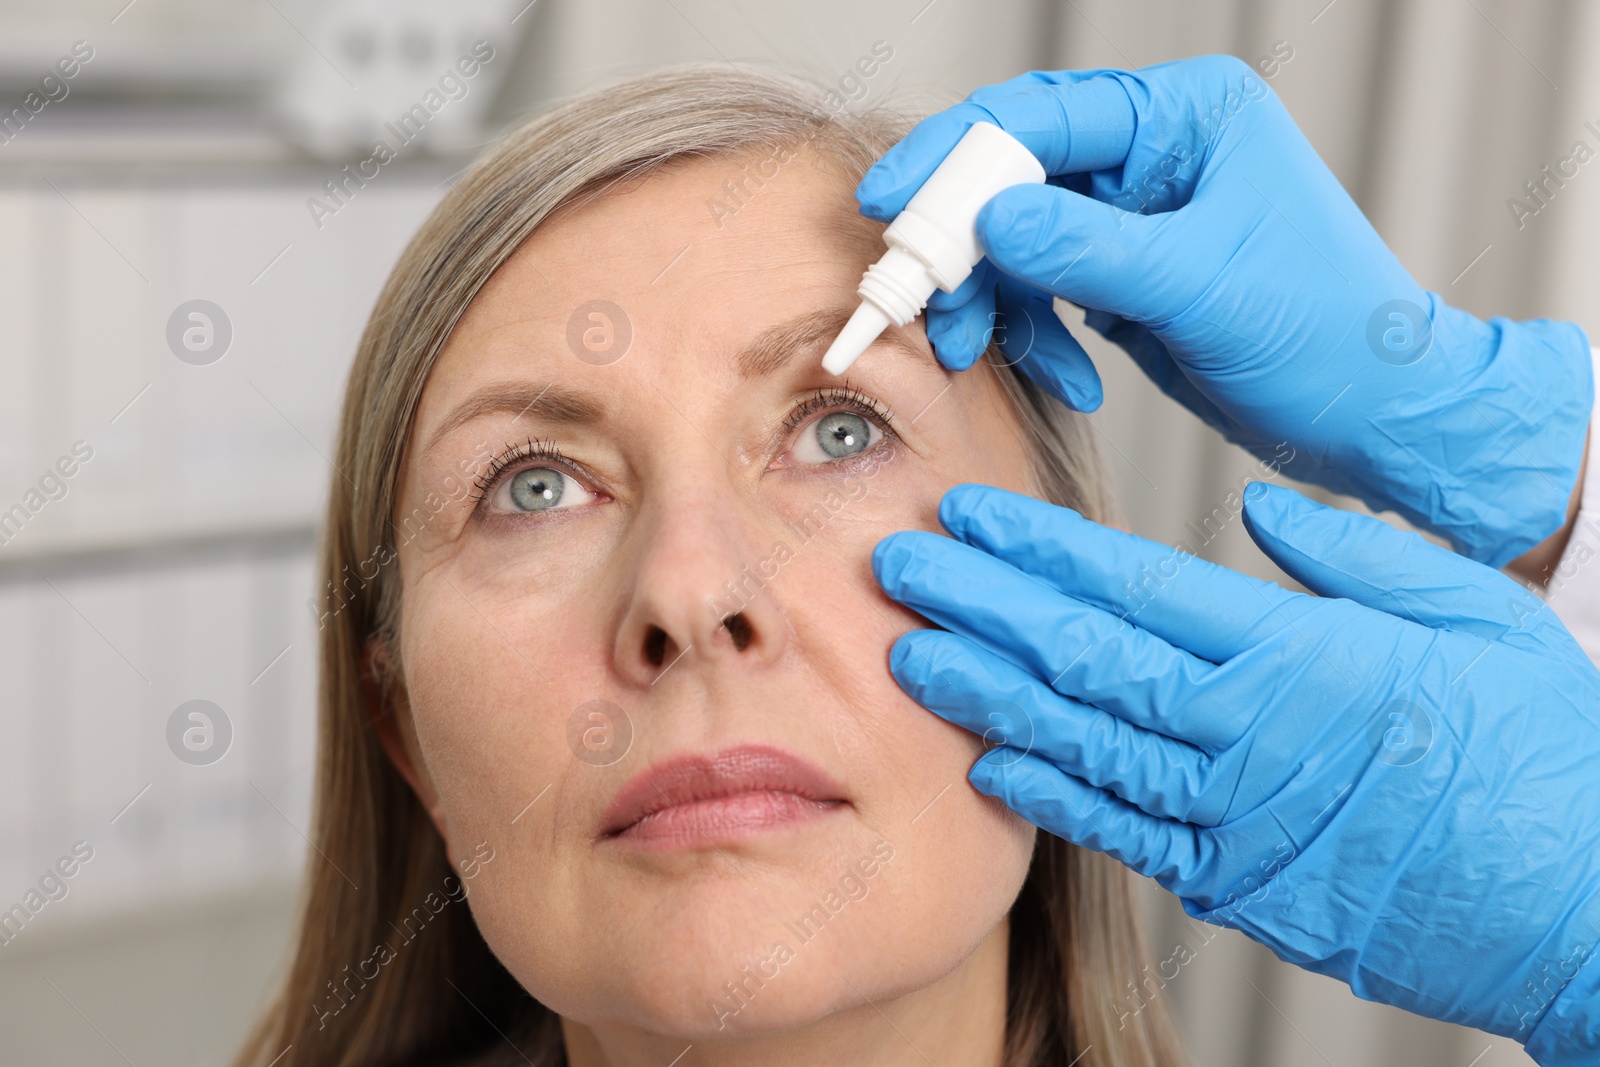 Photo of Medical drops. Doctor dripping medication into woman's eye indoors